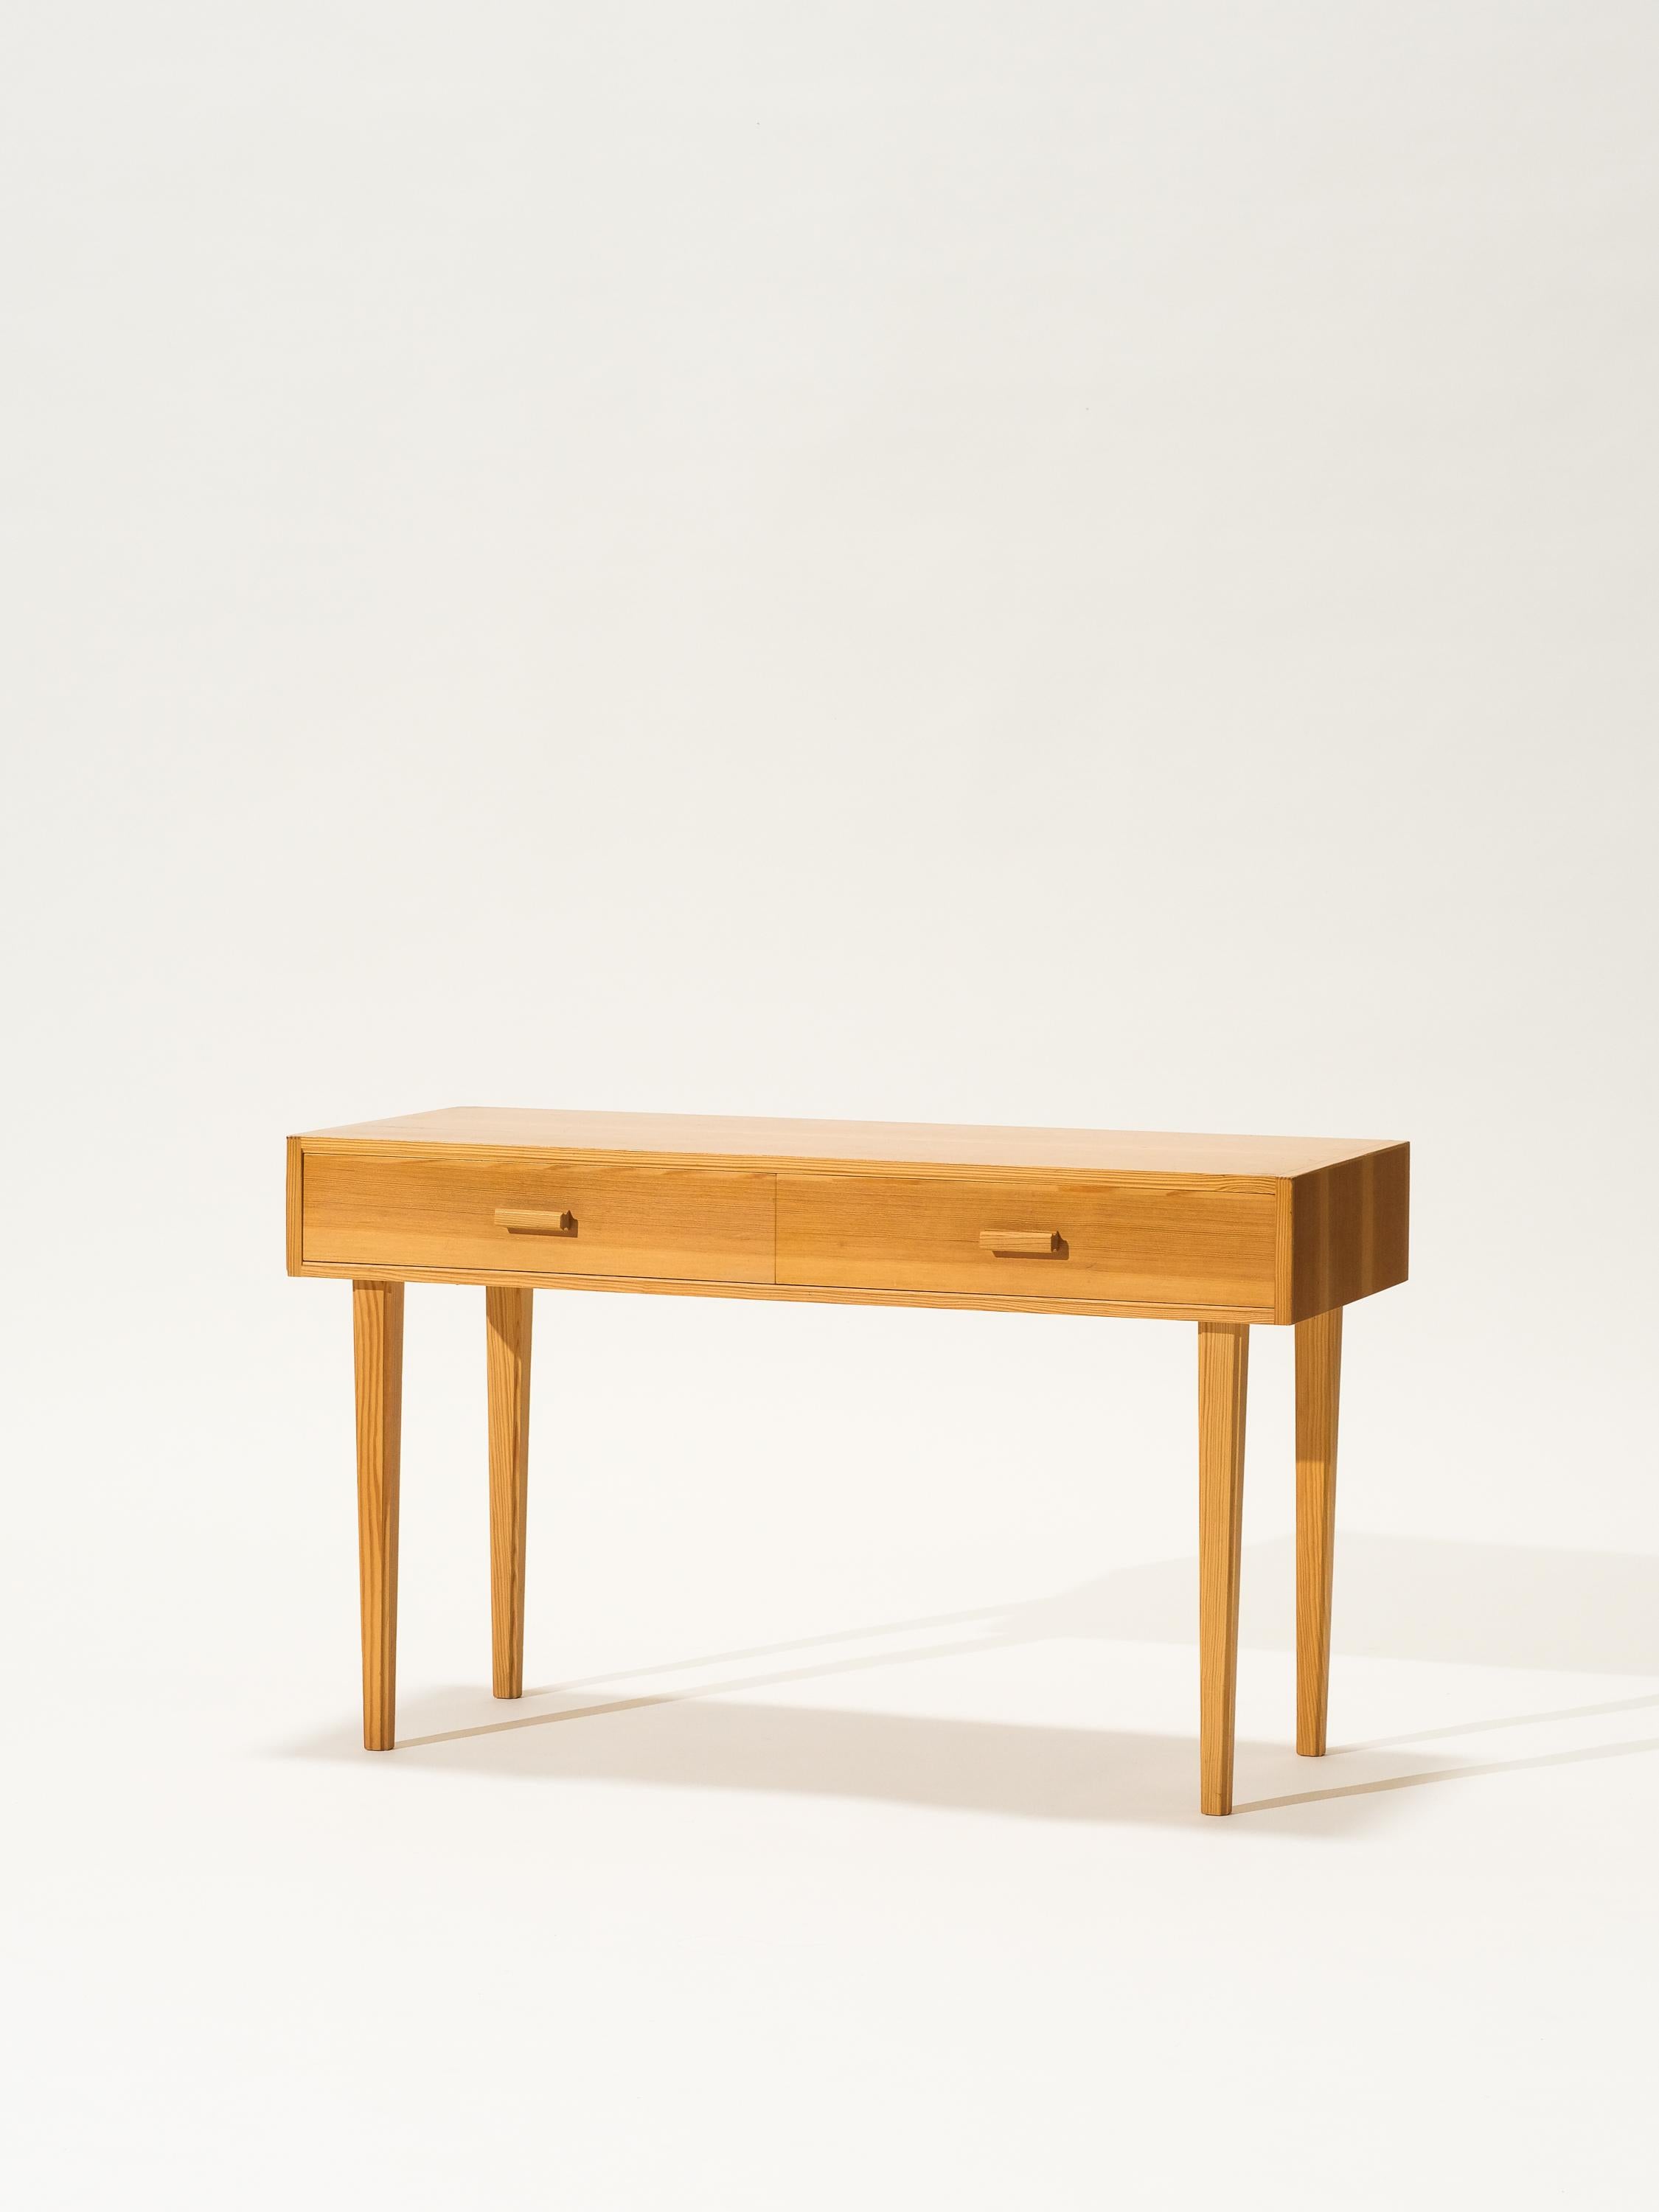 Scandinavian mid-century pine side table. Unknown manufacturer.

Great simple design with two pull out drawers. Beautiful detailing on handles with all original finish.